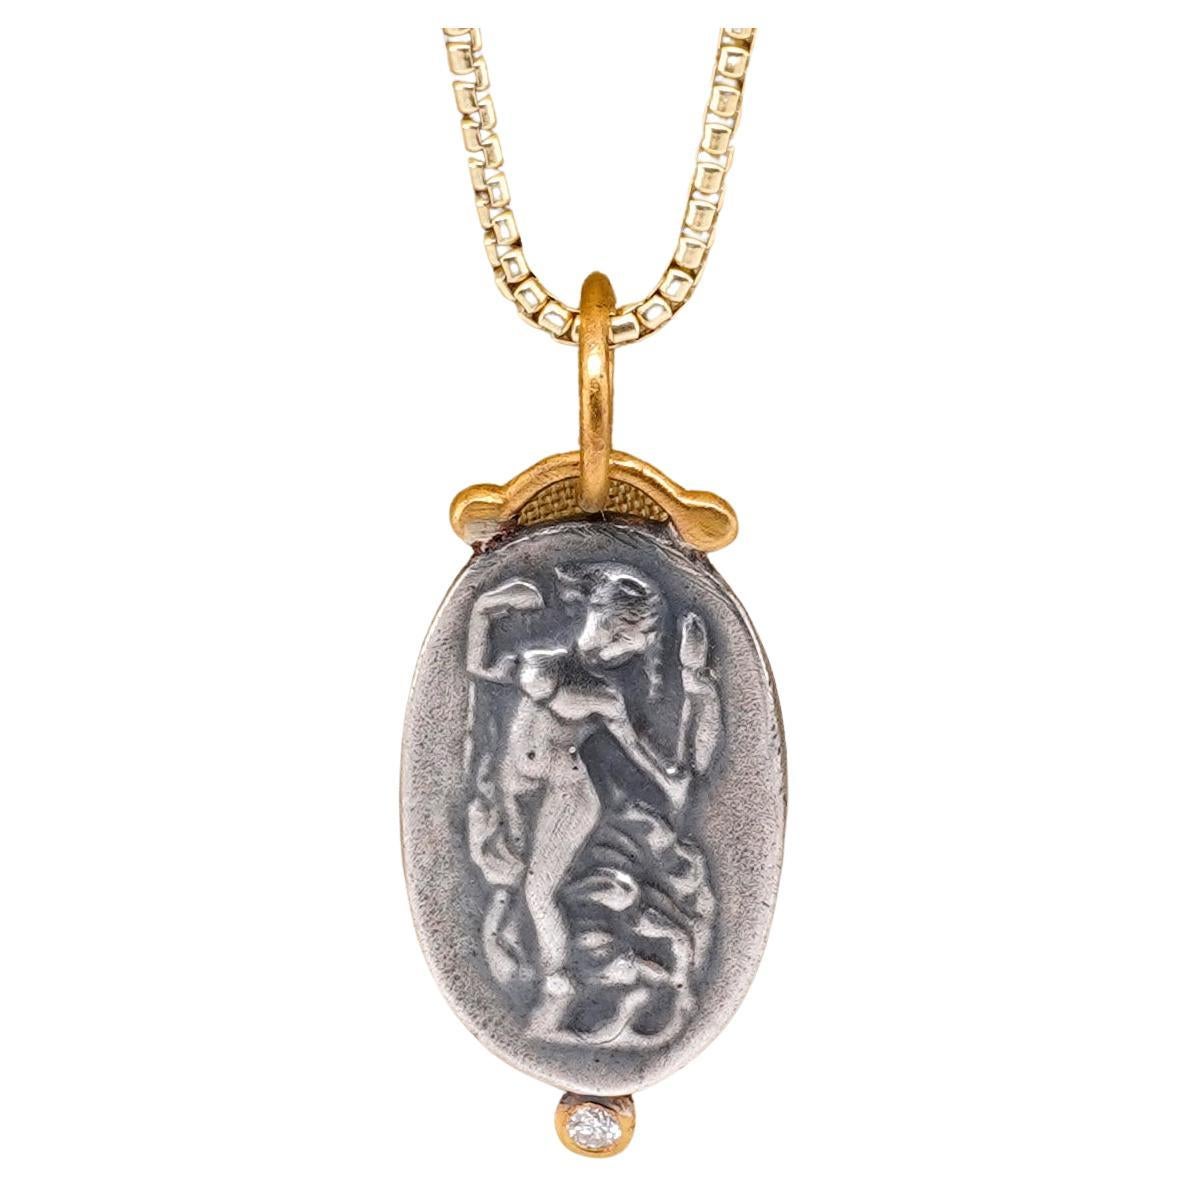 The Joy of Life, Roman Woman Intaglio, Coin Charm Amulet Pendant Necklace with Diamond, 24kt Gold and Silver by Prehistoric Works of Istanbul, Turkey. Diamond - 0.02cts. These coin amulet pendant pair well alone or with other coin pendants or with